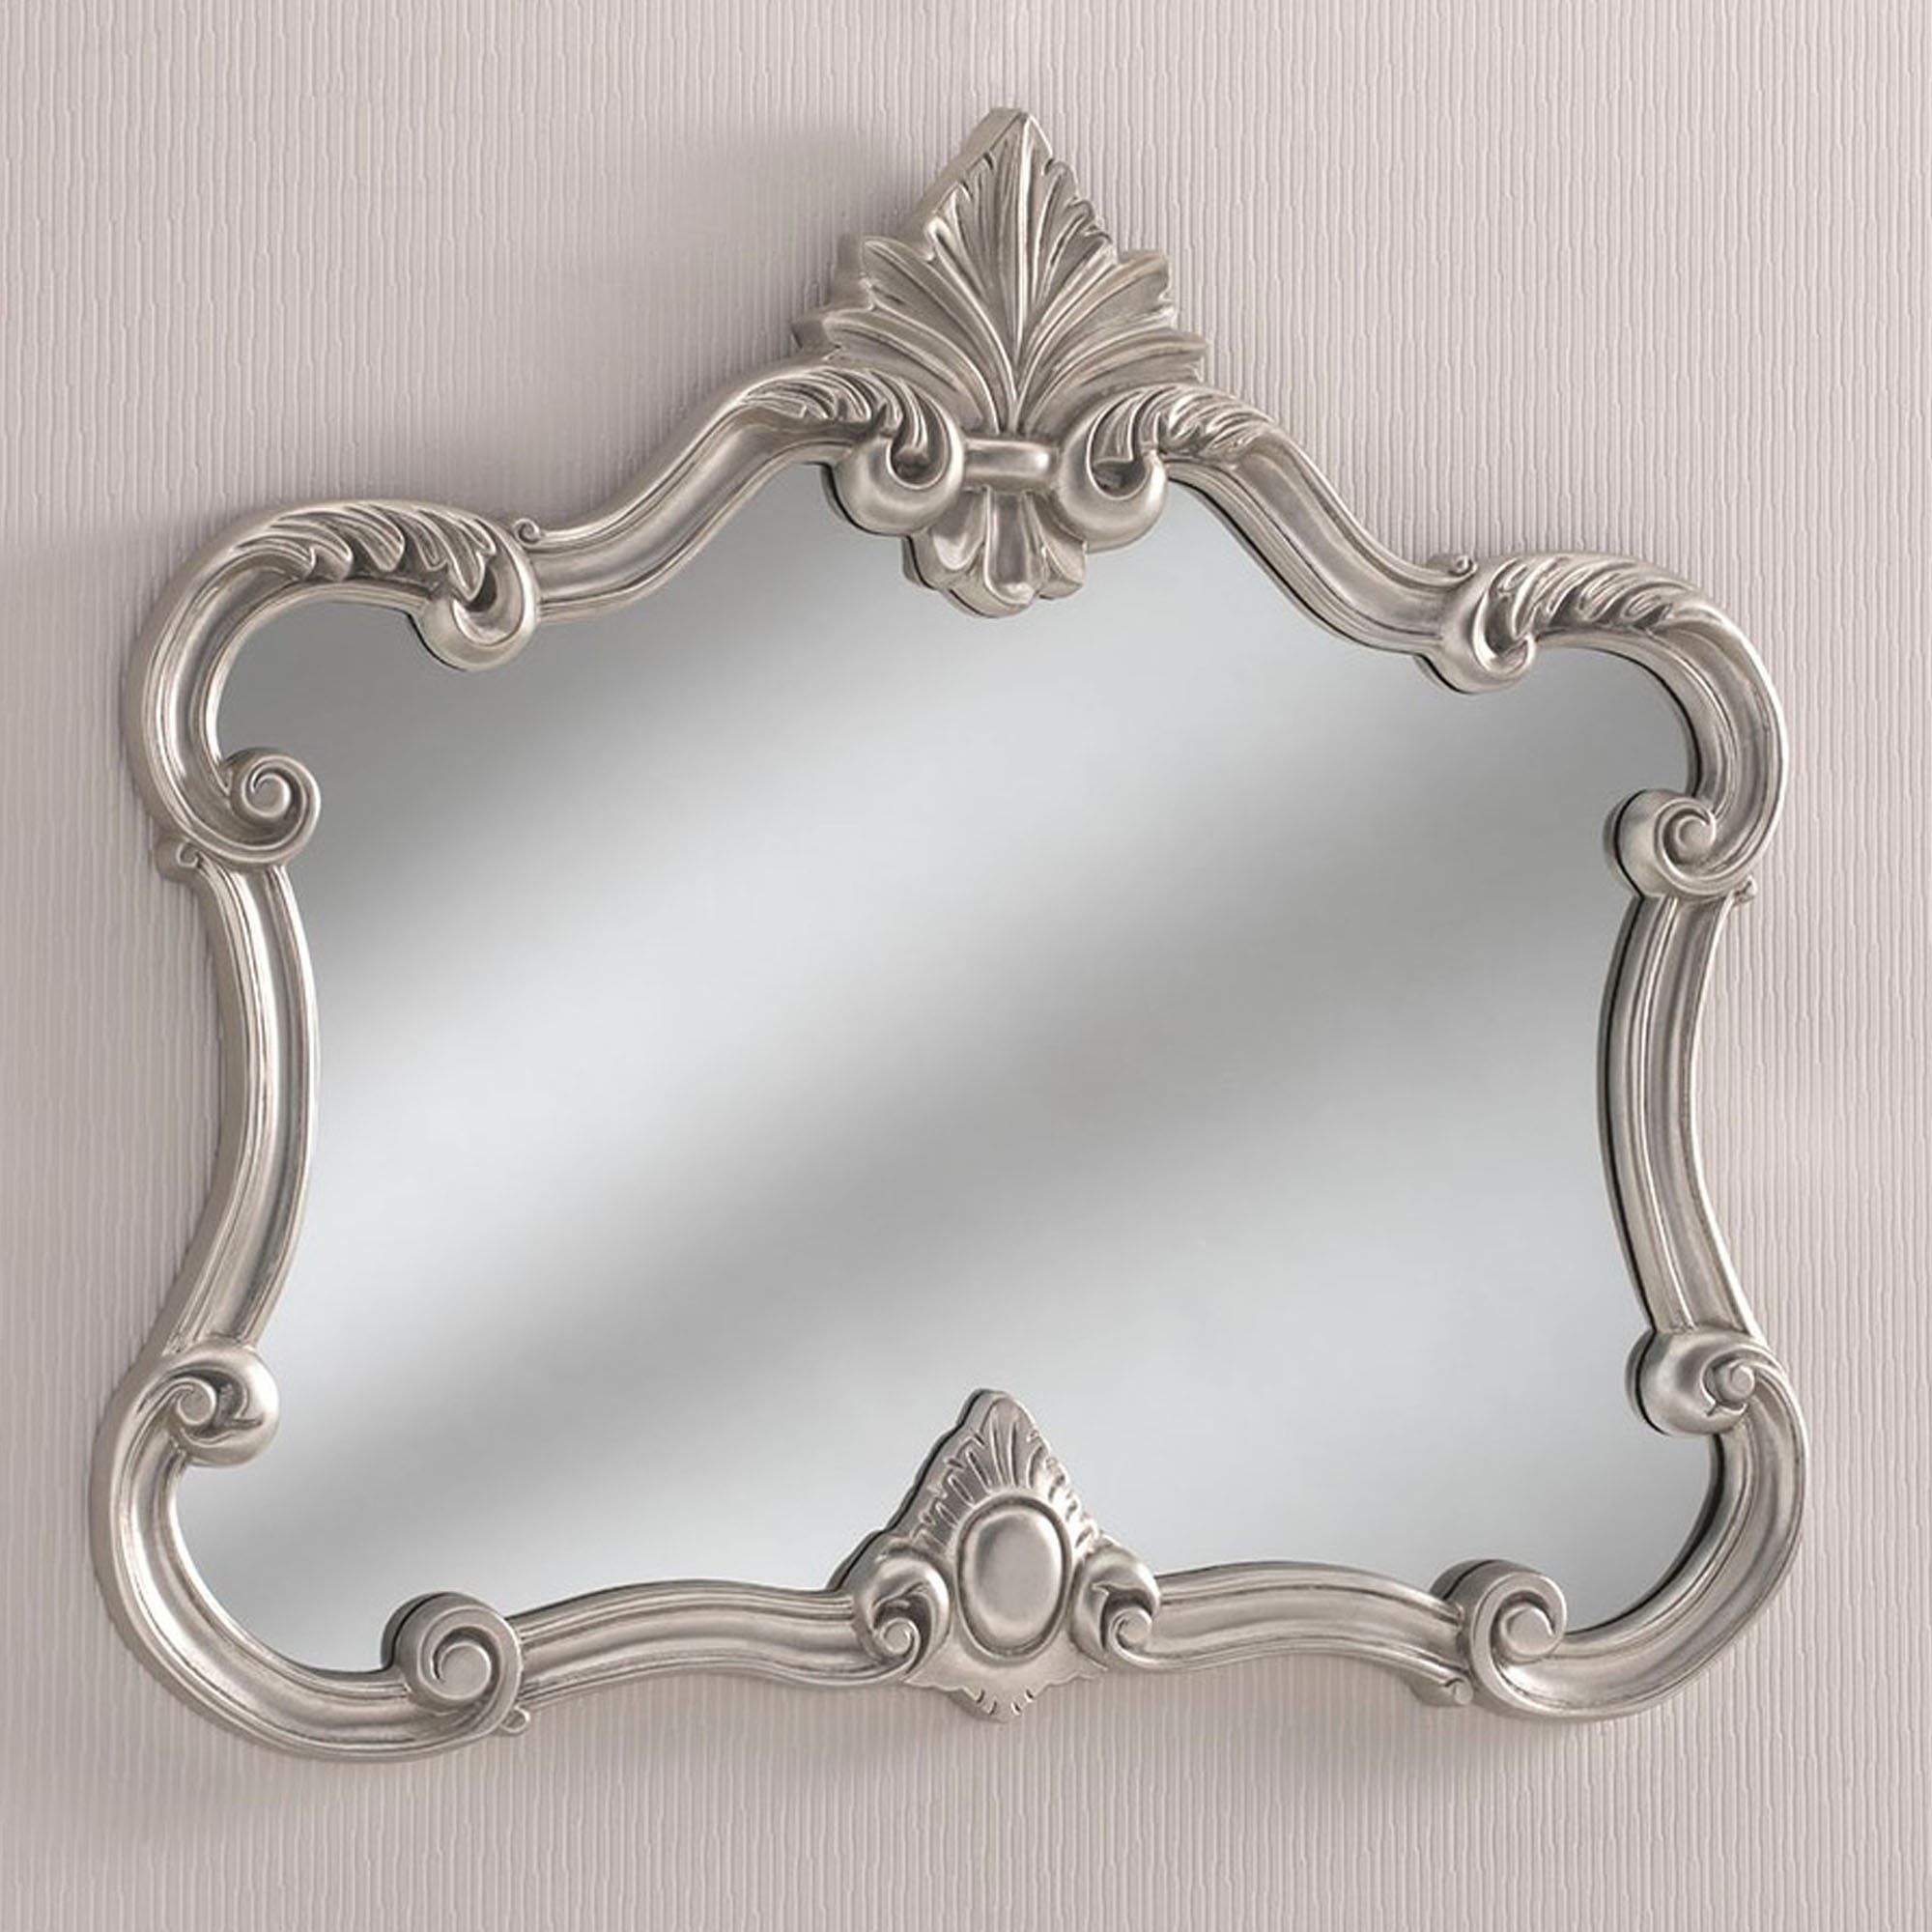 Antique French Style Pewter Decorative Wall Mirror | Homesdirect365 With Booth Reclaimed Wall Mirrors Accent (View 13 of 15)